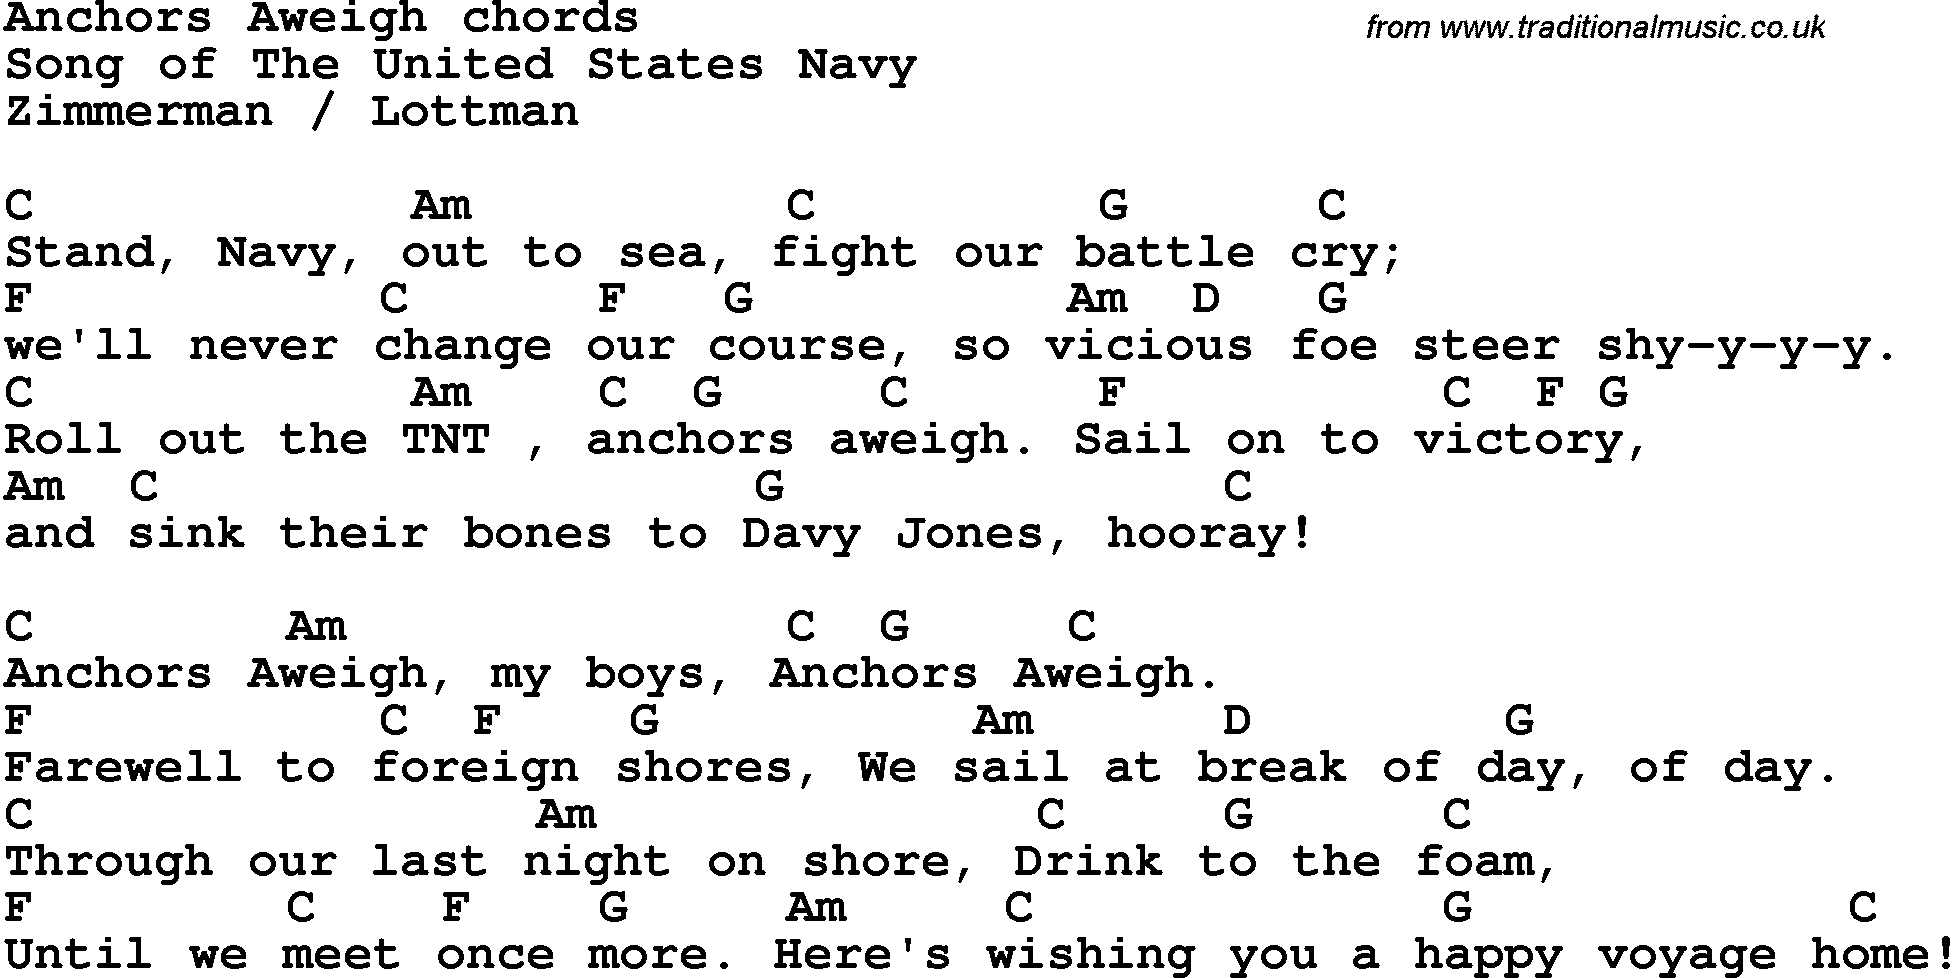 Song Lyrics with guitar chords for Anchors Aweigh